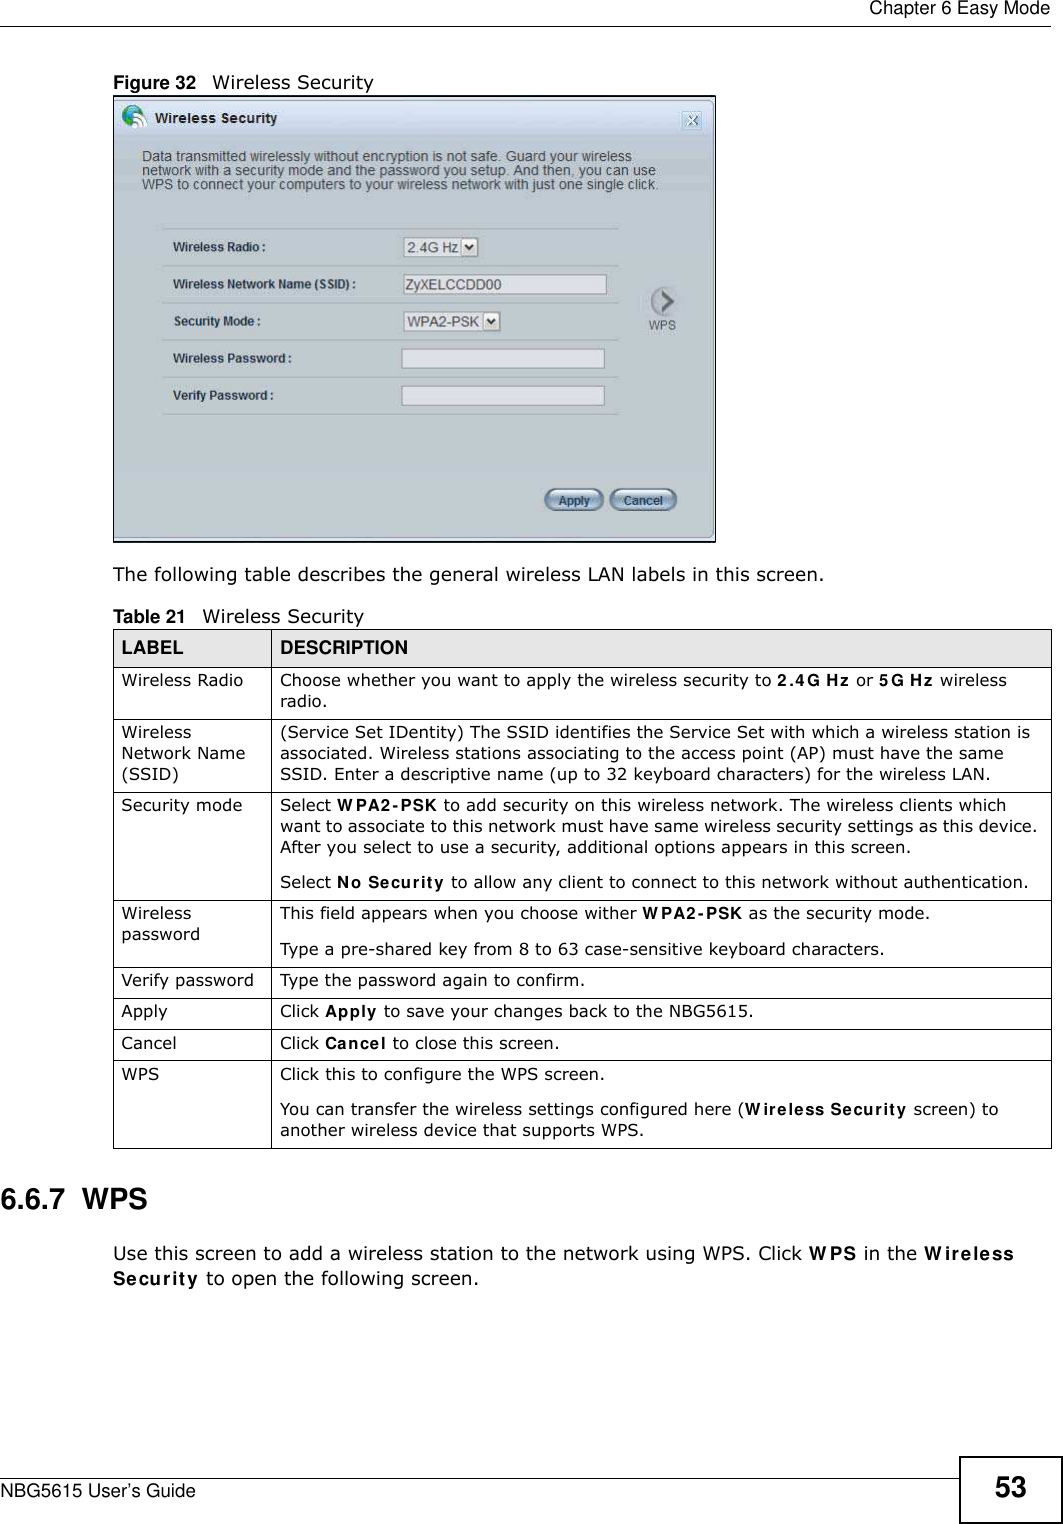  Chapter 6 Easy ModeNBG5615 User’s Guide 53Figure 32   Wireless SecurityThe following table describes the general wireless LAN labels in this screen.6.6.7  WPSUse this screen to add a wireless station to the network using WPS. Click W PS in the W ireless Security to open the following screen.Table 21   Wireless SecurityLABEL DESCRIPTIONWireless Radio Choose whether you want to apply the wireless security to 2.4 G Hz or 5 G Hz wireless radio.Wireless Network Name (SSID)(Service Set IDentity) The SSID identifies the Service Set with which a wireless station is associated. Wireless stations associating to the access point (AP) must have the same SSID. Enter a descriptive name (up to 32 keyboard characters) for the wireless LAN. Security mode Select W PA2 -PSK to add security on this wireless network. The wireless clients which want to associate to this network must have same wireless security settings as this device. After you select to use a security, additional options appears in this screen. Select No Security to allow any client to connect to this network without authentication.Wireless passwordThis field appears when you choose wither W PA2 -PSK as the security mode.Type a pre-shared key from 8 to 63 case-sensitive keyboard characters.Verify password Type the password again to confirm.Apply Click Apply to save your changes back to the NBG5615.Cancel Click Cancel to close this screen.WPS Click this to configure the WPS screen.You can transfer the wireless settings configured here (W ireless Security screen) to another wireless device that supports WPS.